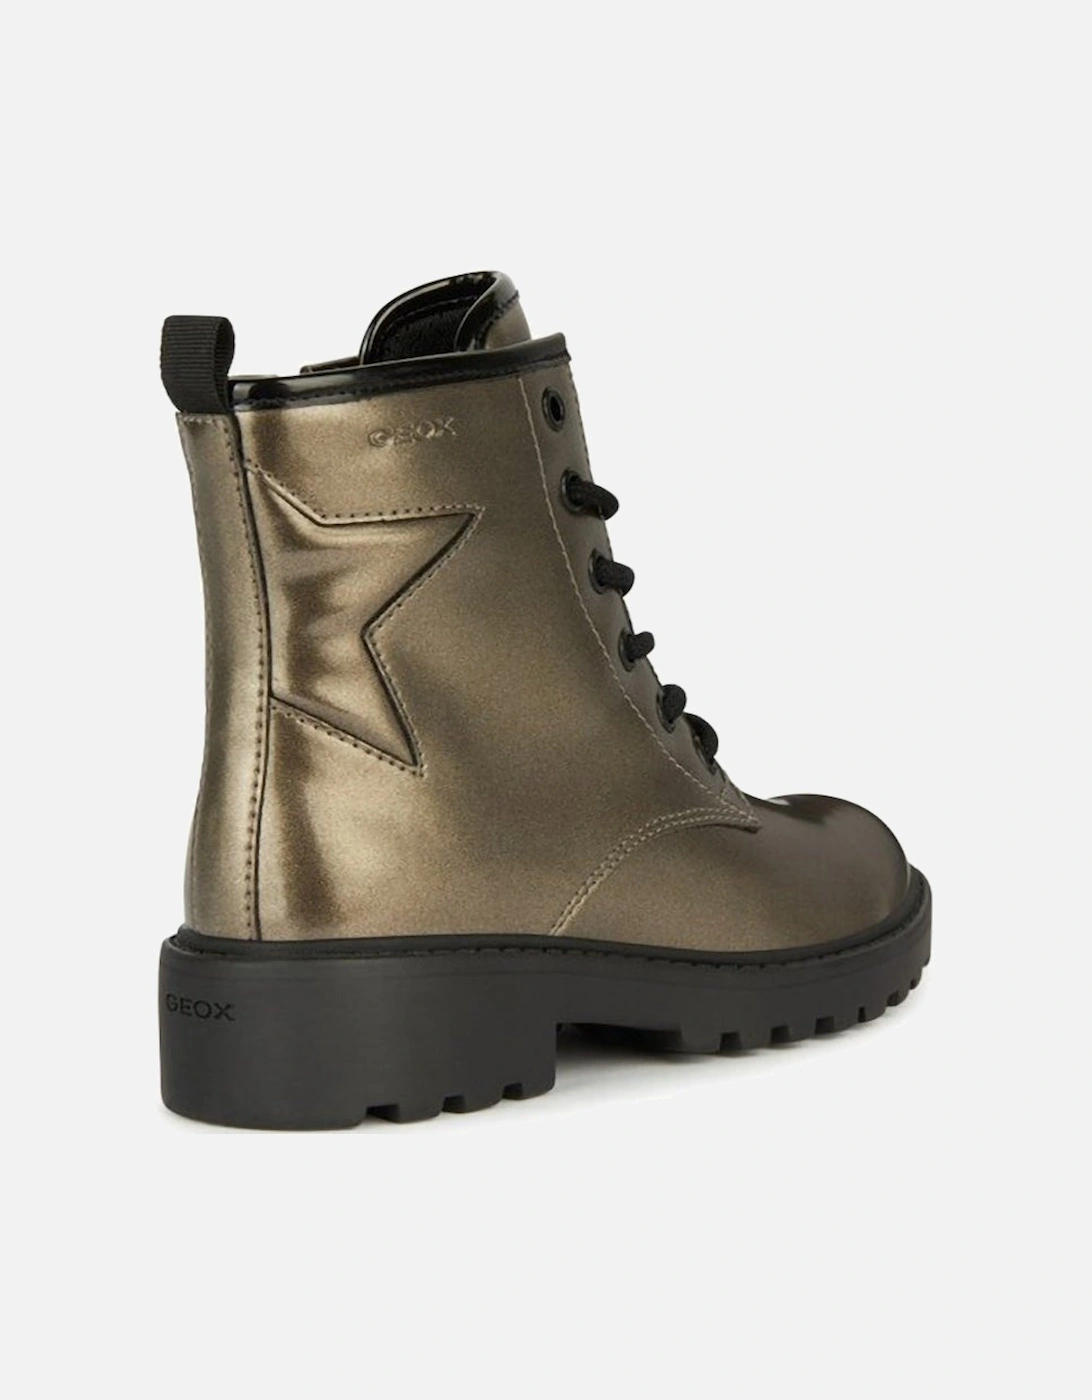 J Casey Girls Ankle Boots